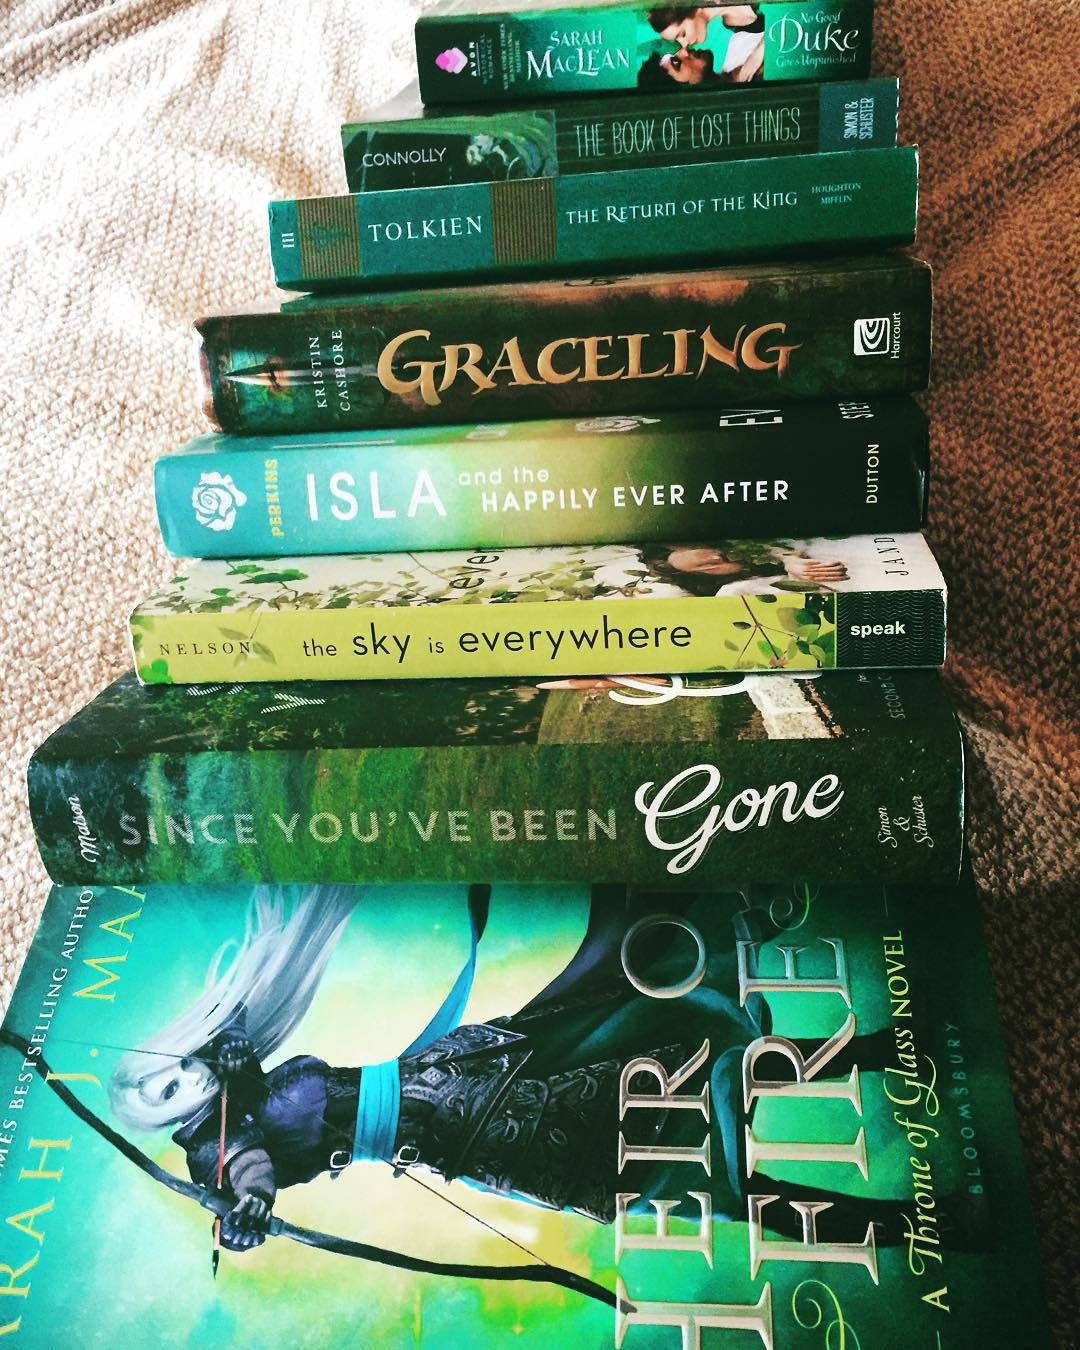 Thought I would catch up on some #weeklybookstagram with this shades of #green! I discovered that I have a bunch of green books! But someone of them are keeping up very precarious piles, so I didn’t grab them. This is a good group though! Some...